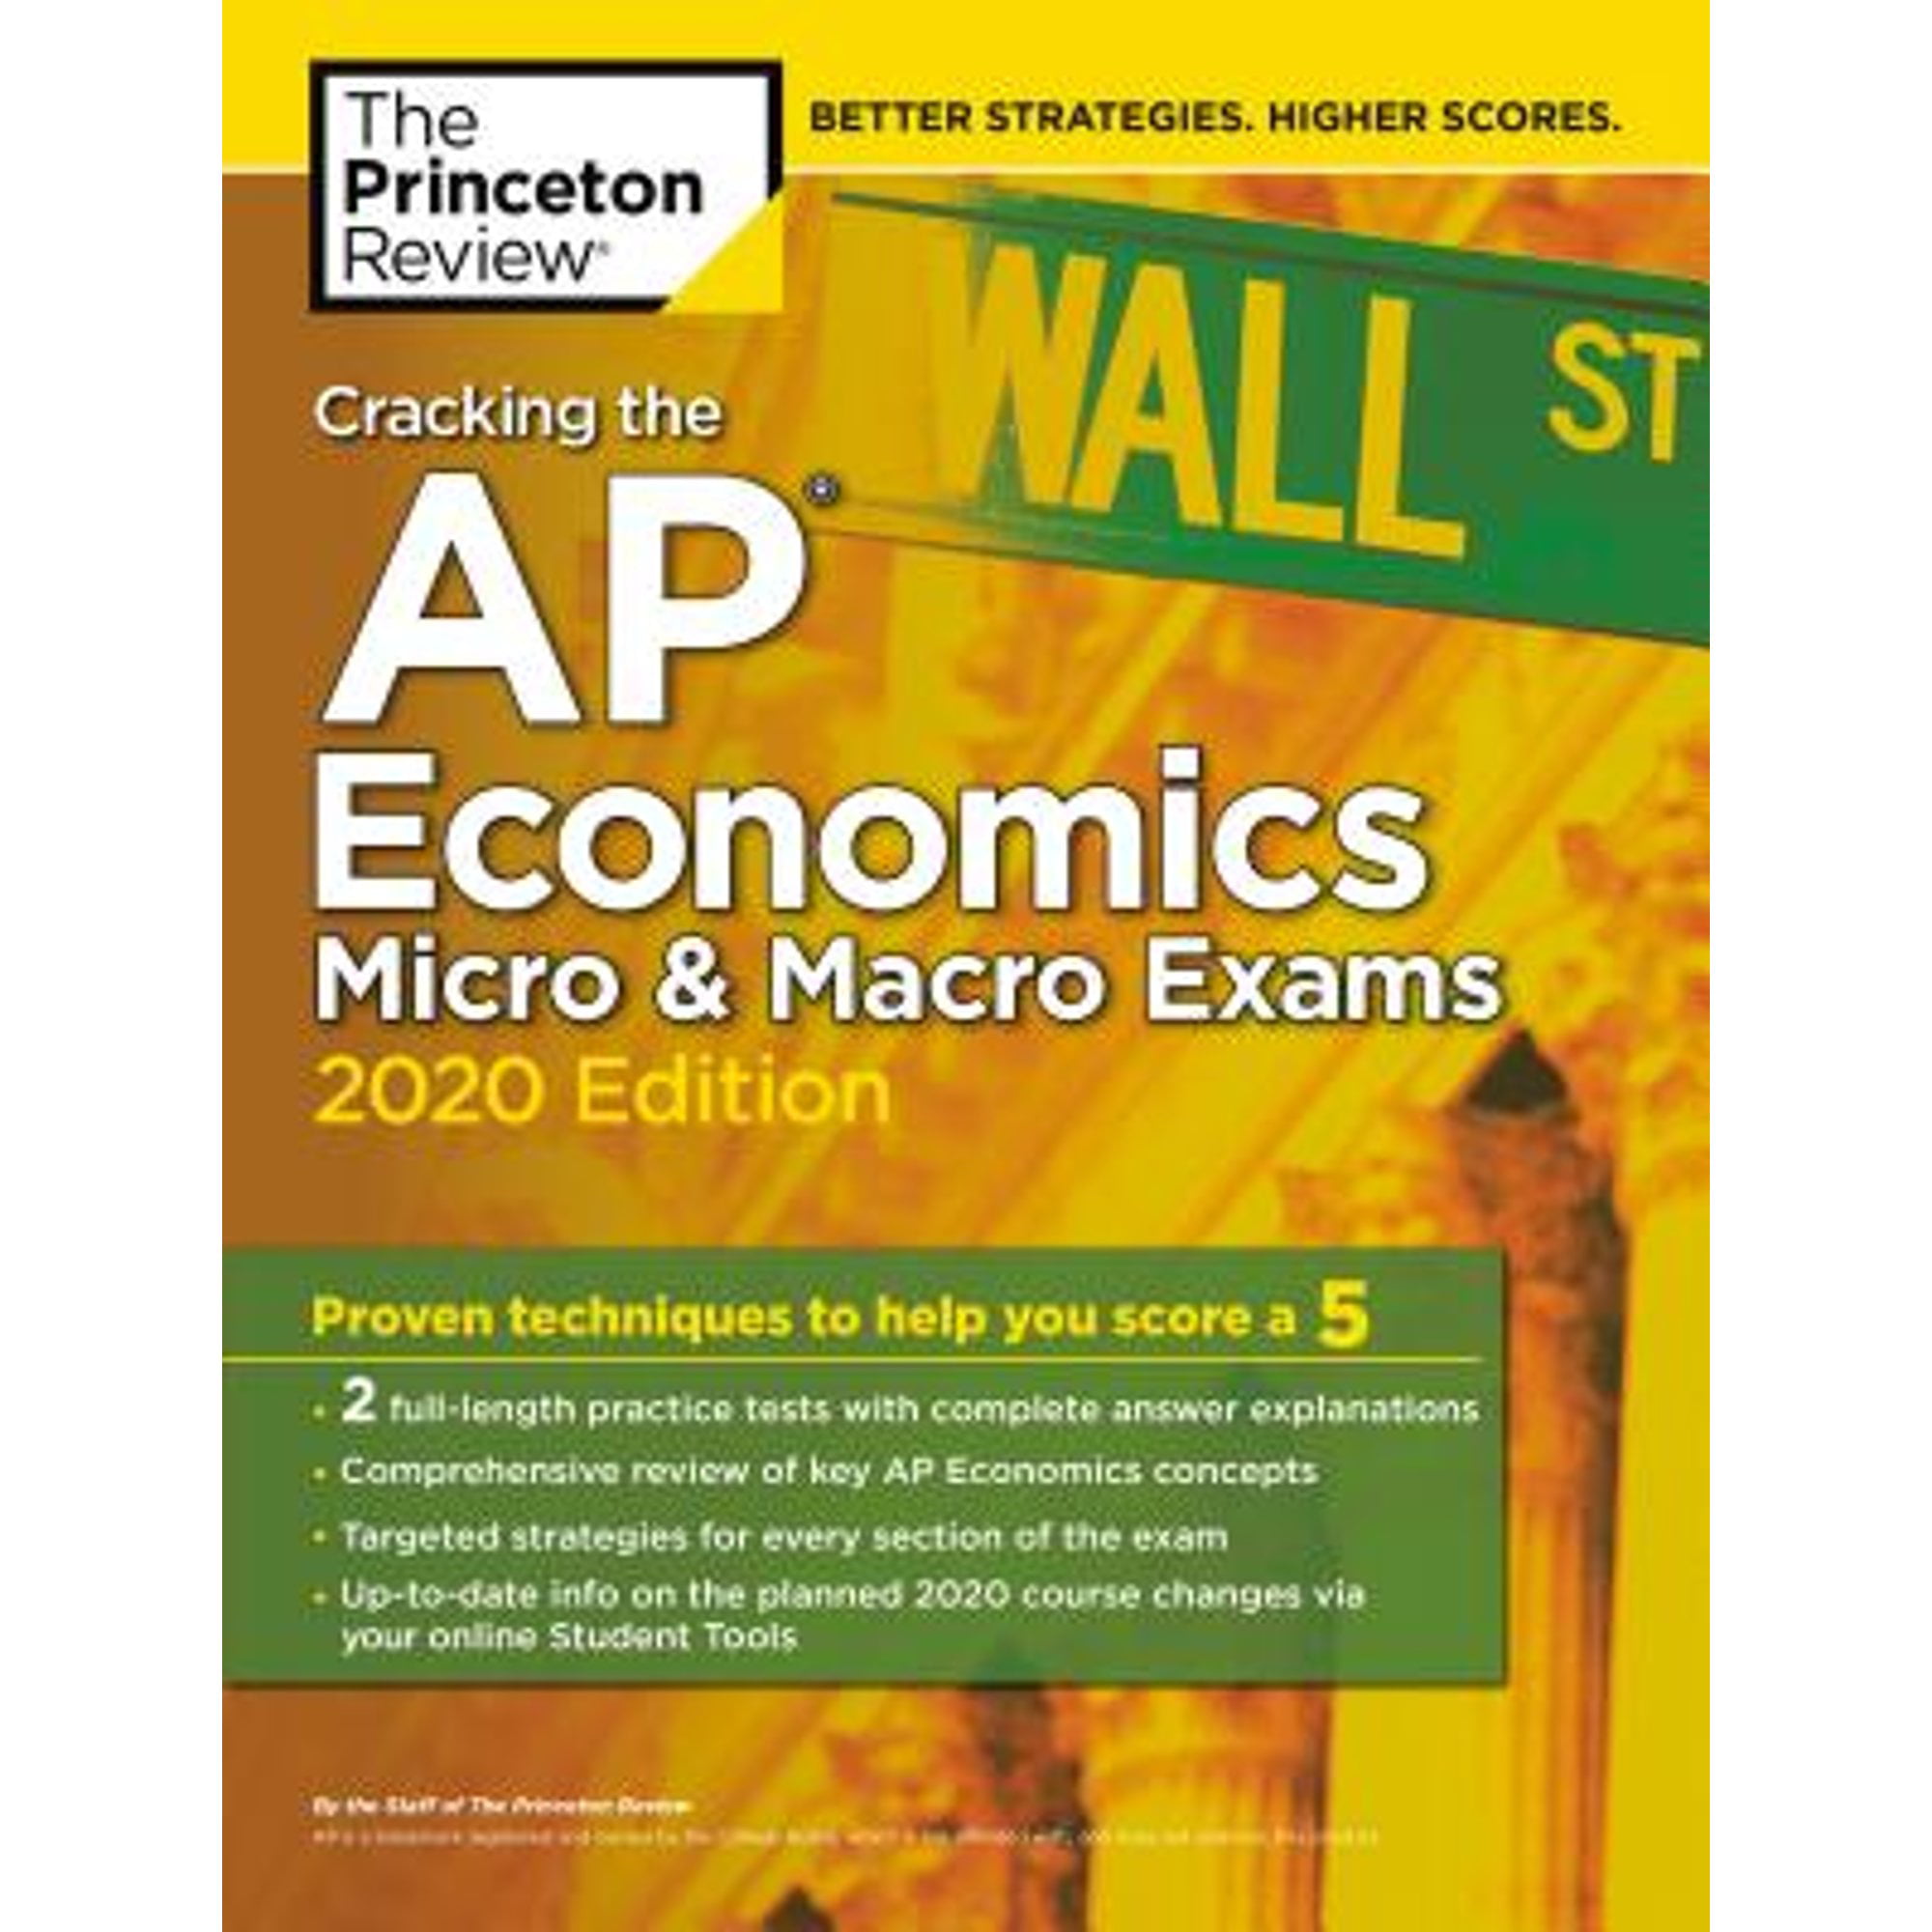 Review　Macro　Proven　Edition:　AP　the　(Paperback　Pre-Owned　The　by　Tests　Cracking　Exams,　Economics　9780525568209)　Micro　2020　Practice　Princeton